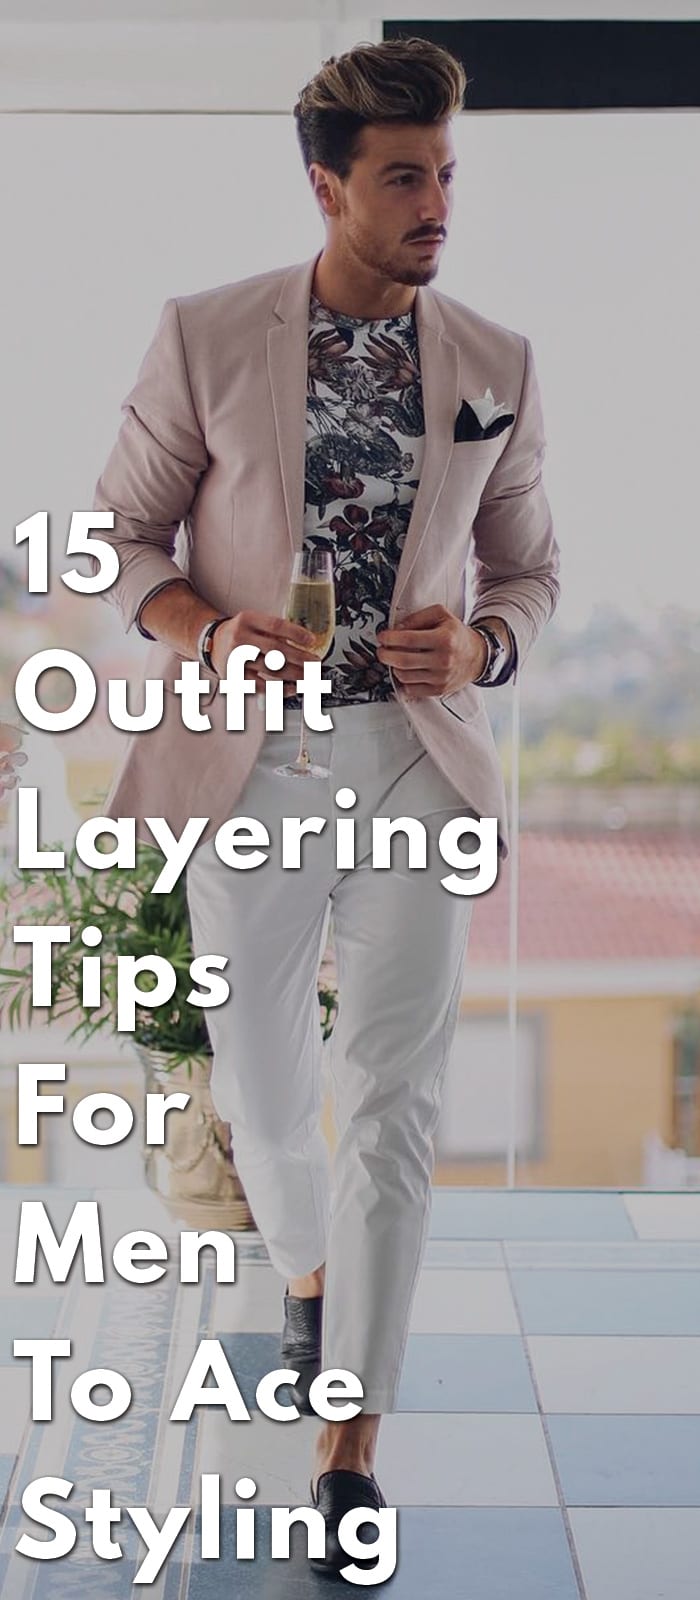 15-Outfit-Layering-Tips-For-Men-To-Ace-Styling